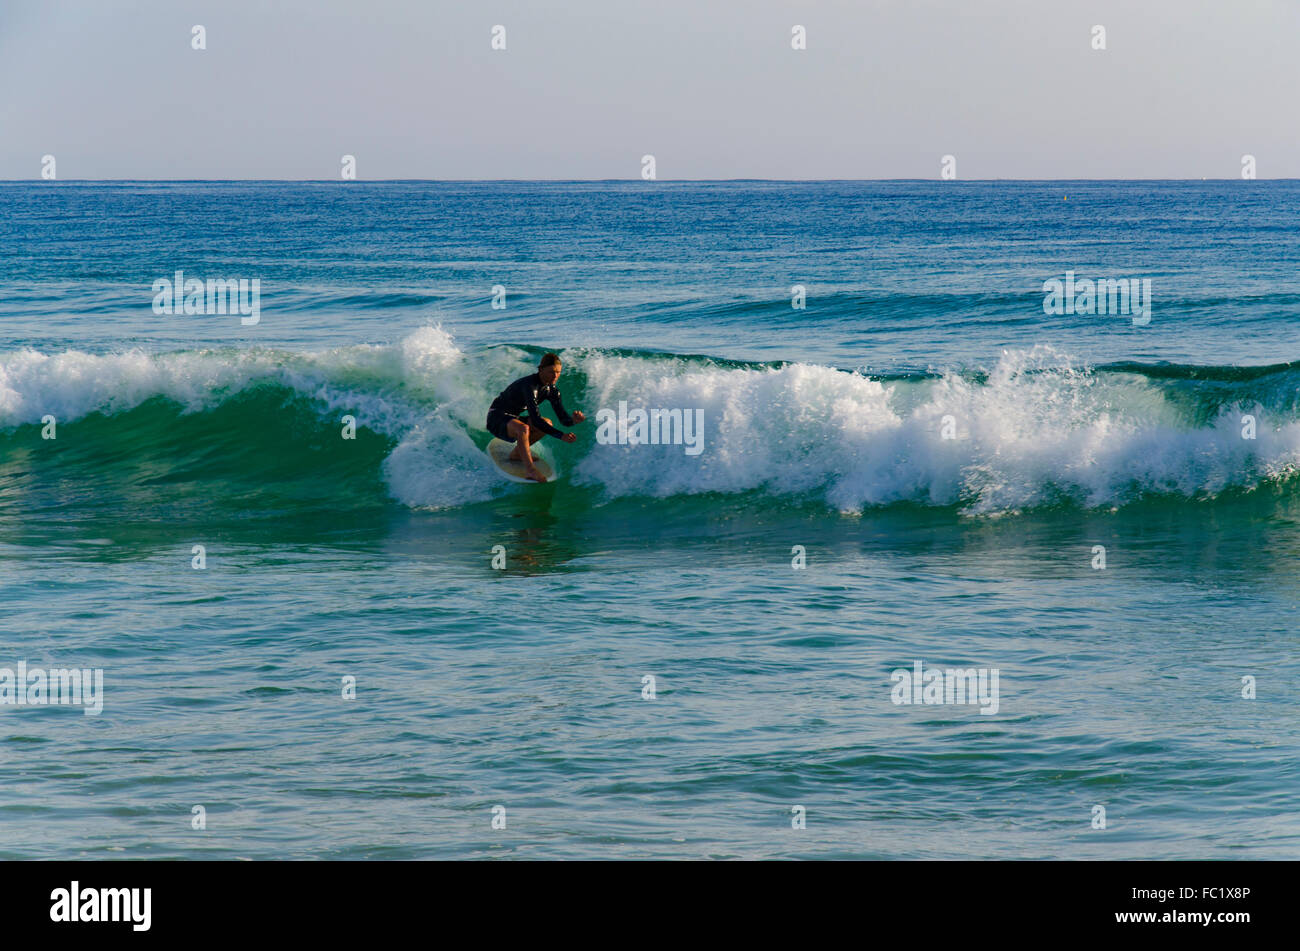 A surfer hangs five as he rides the nose of his board in clear morning surf on the New South Wales South Coast in Australia Stock Photo